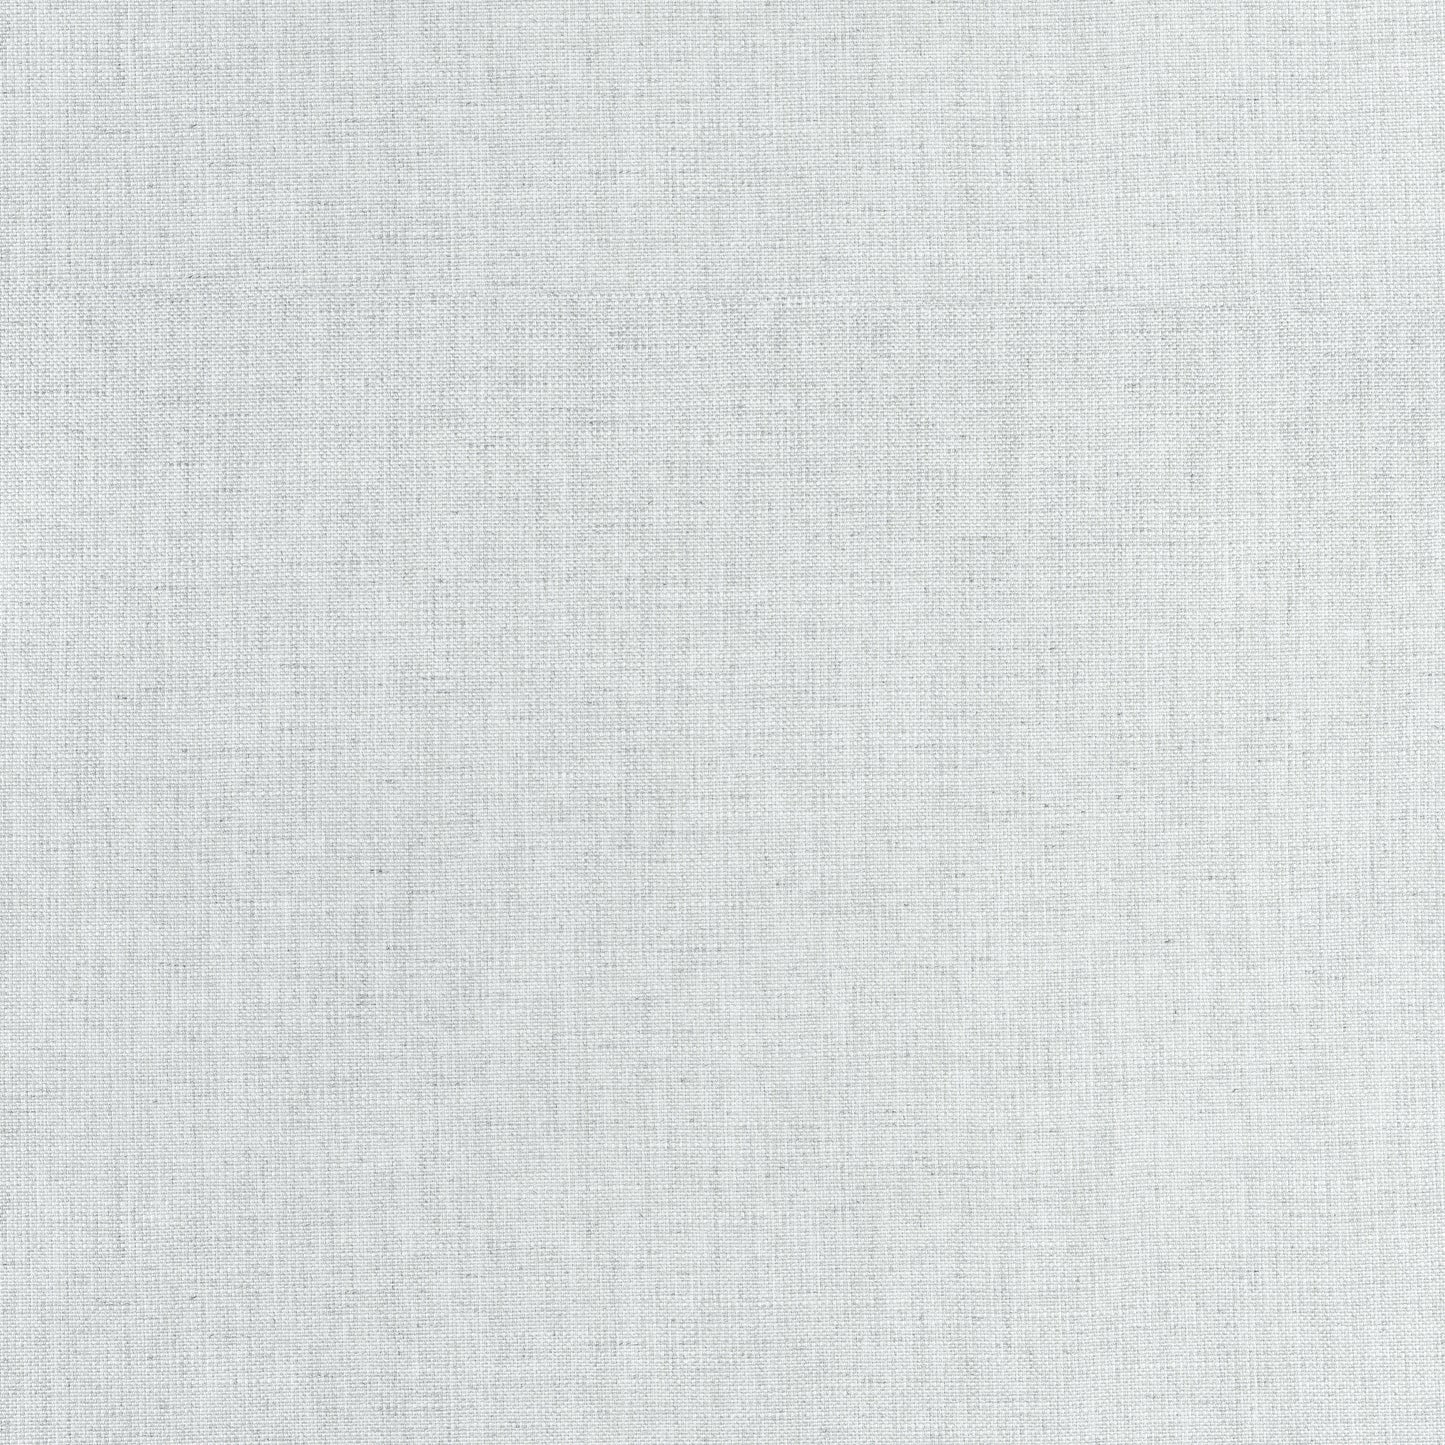 Purchase Thibaut Fabric Item# W75206 pattern name Ambient color Blue